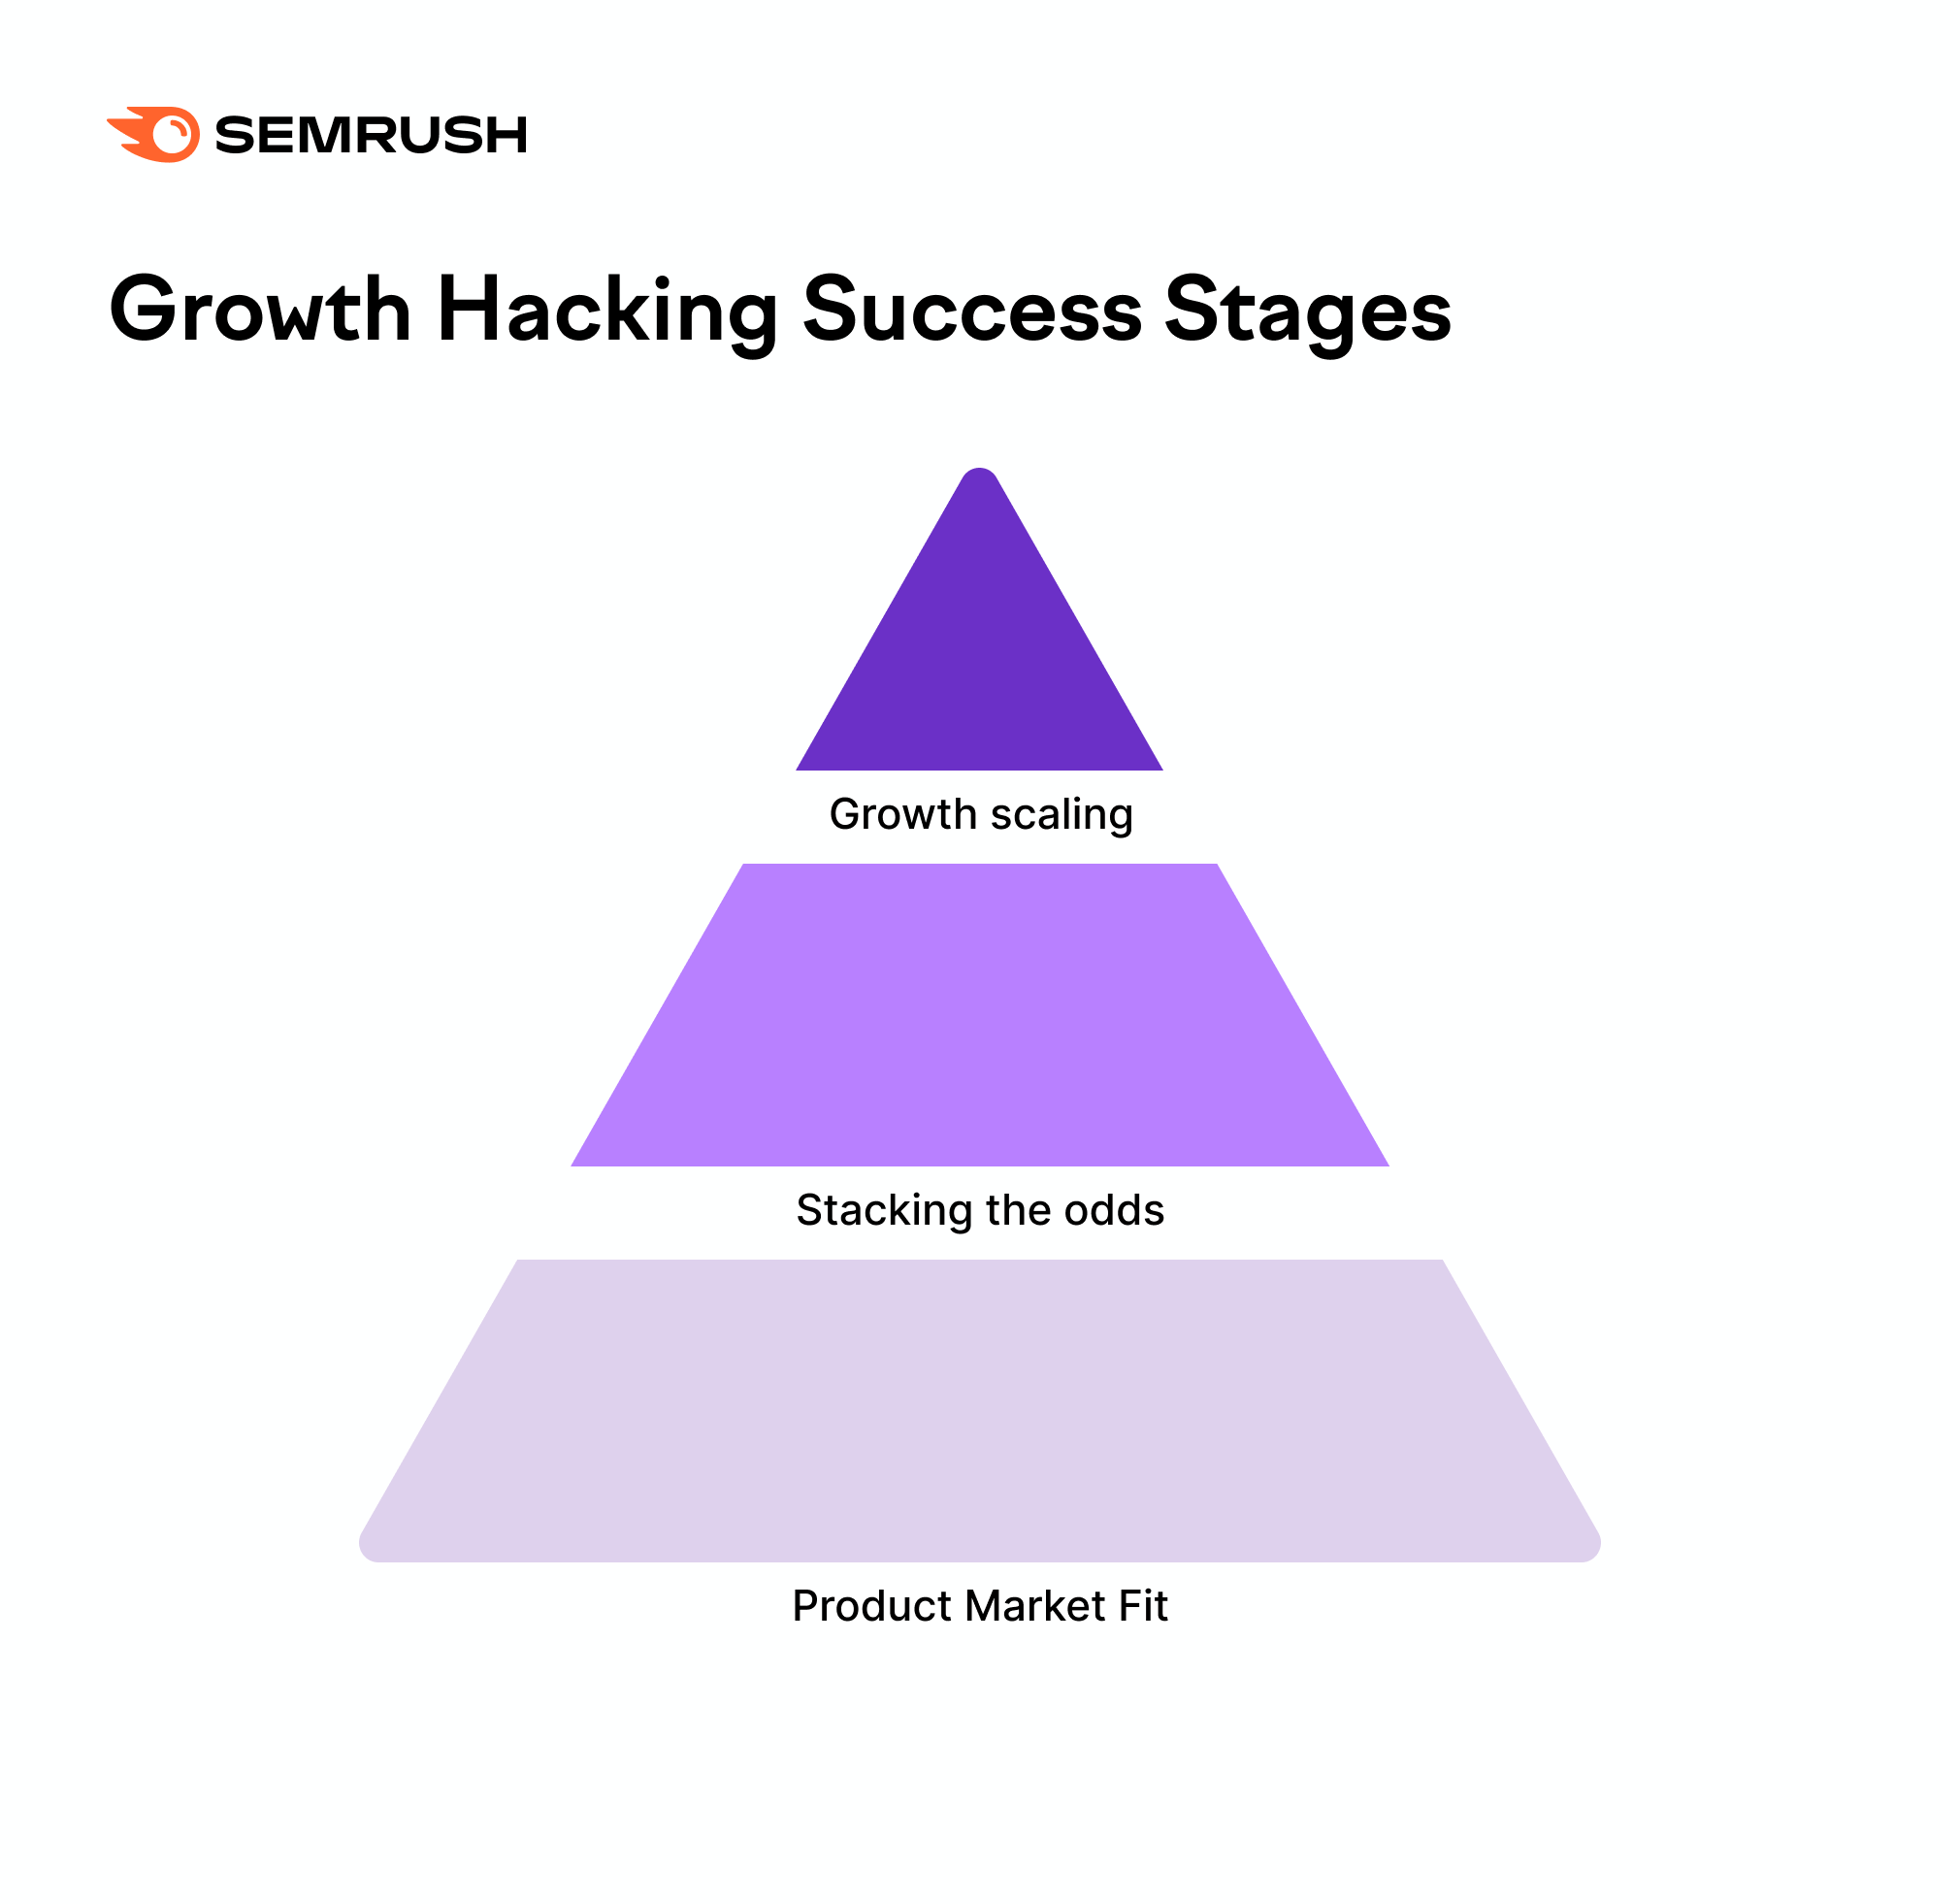 Growth hacking success stages